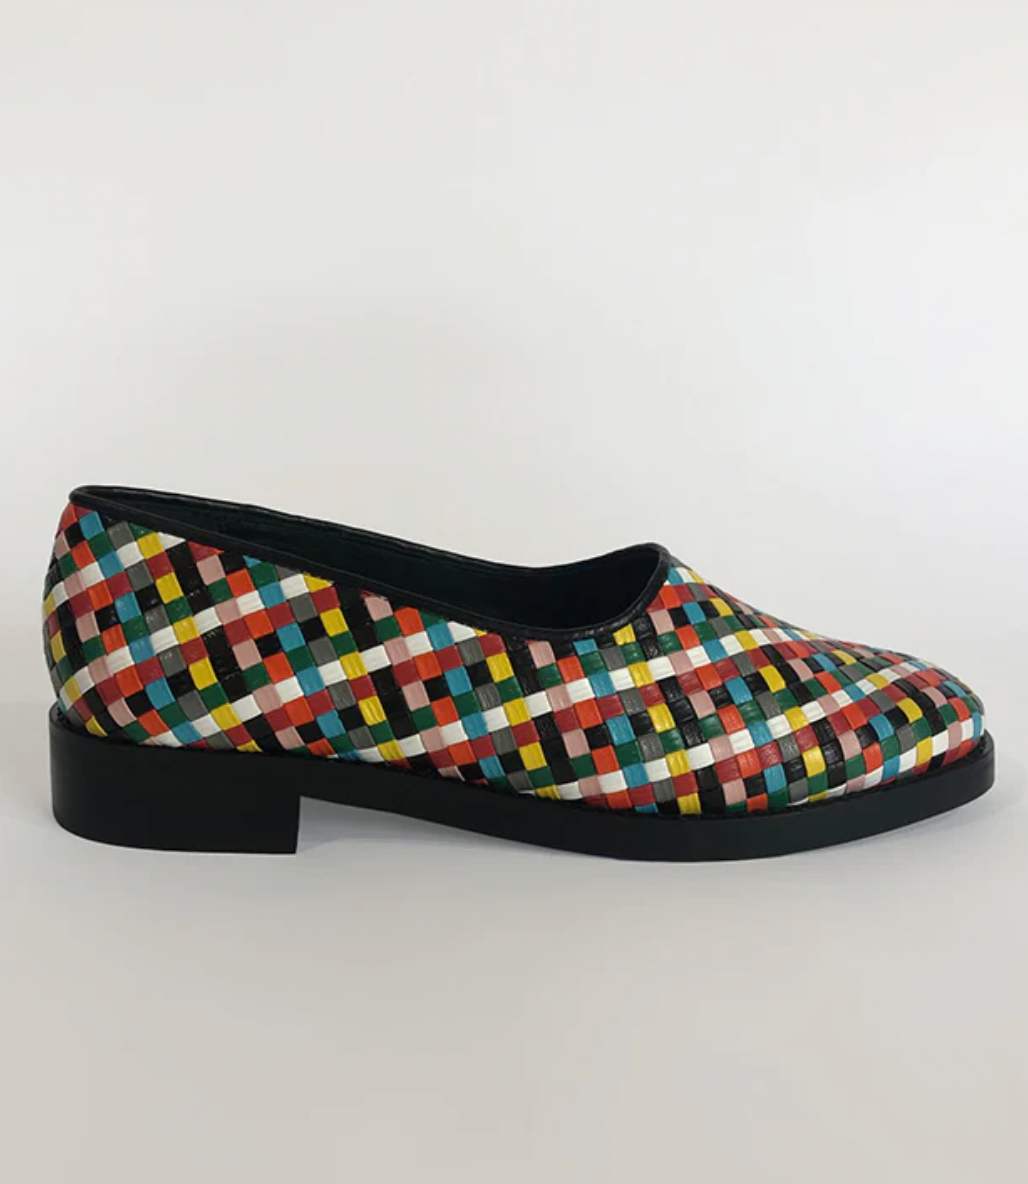 Product Image for Woven Glove Shoe, Nappa Multi